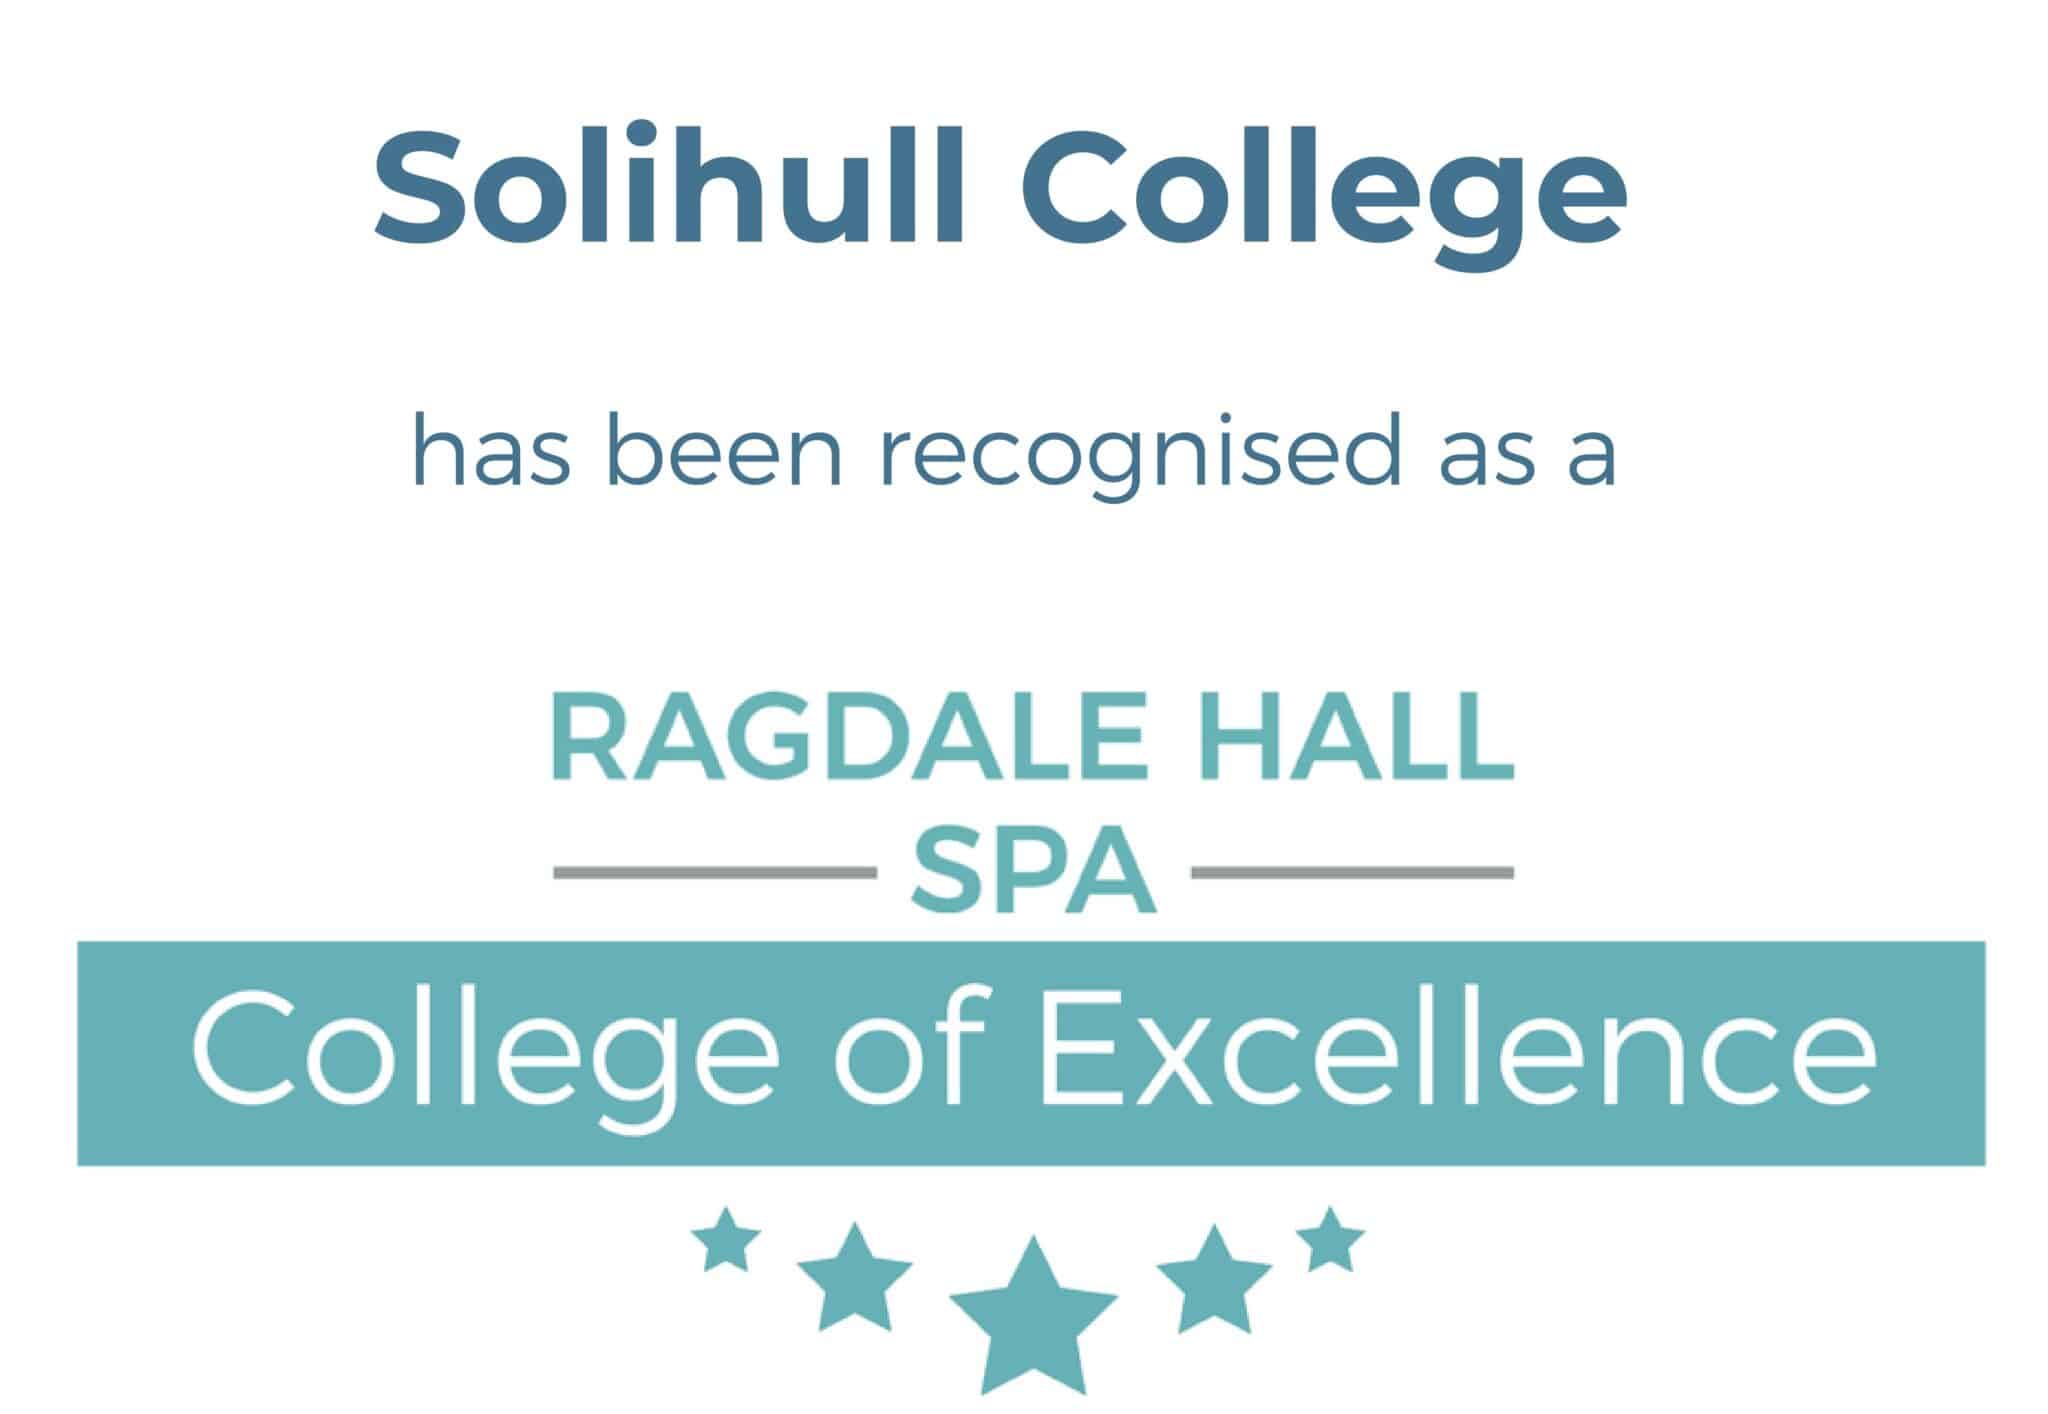 Certificate that says: Solihull College has been recognised as a Ragdale Hall Spa College of Excellence